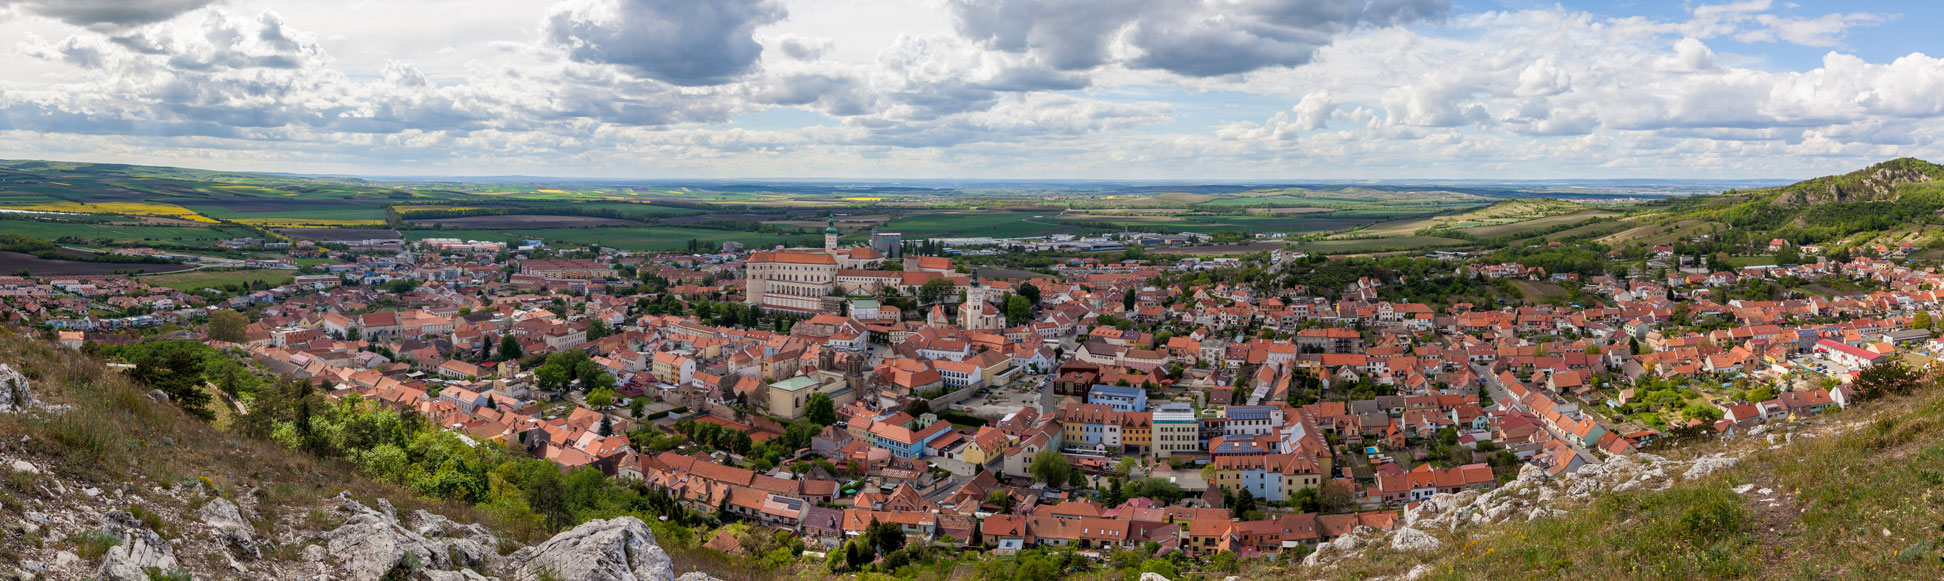 Mikulov town in the South Moravia region of the Czech Republic